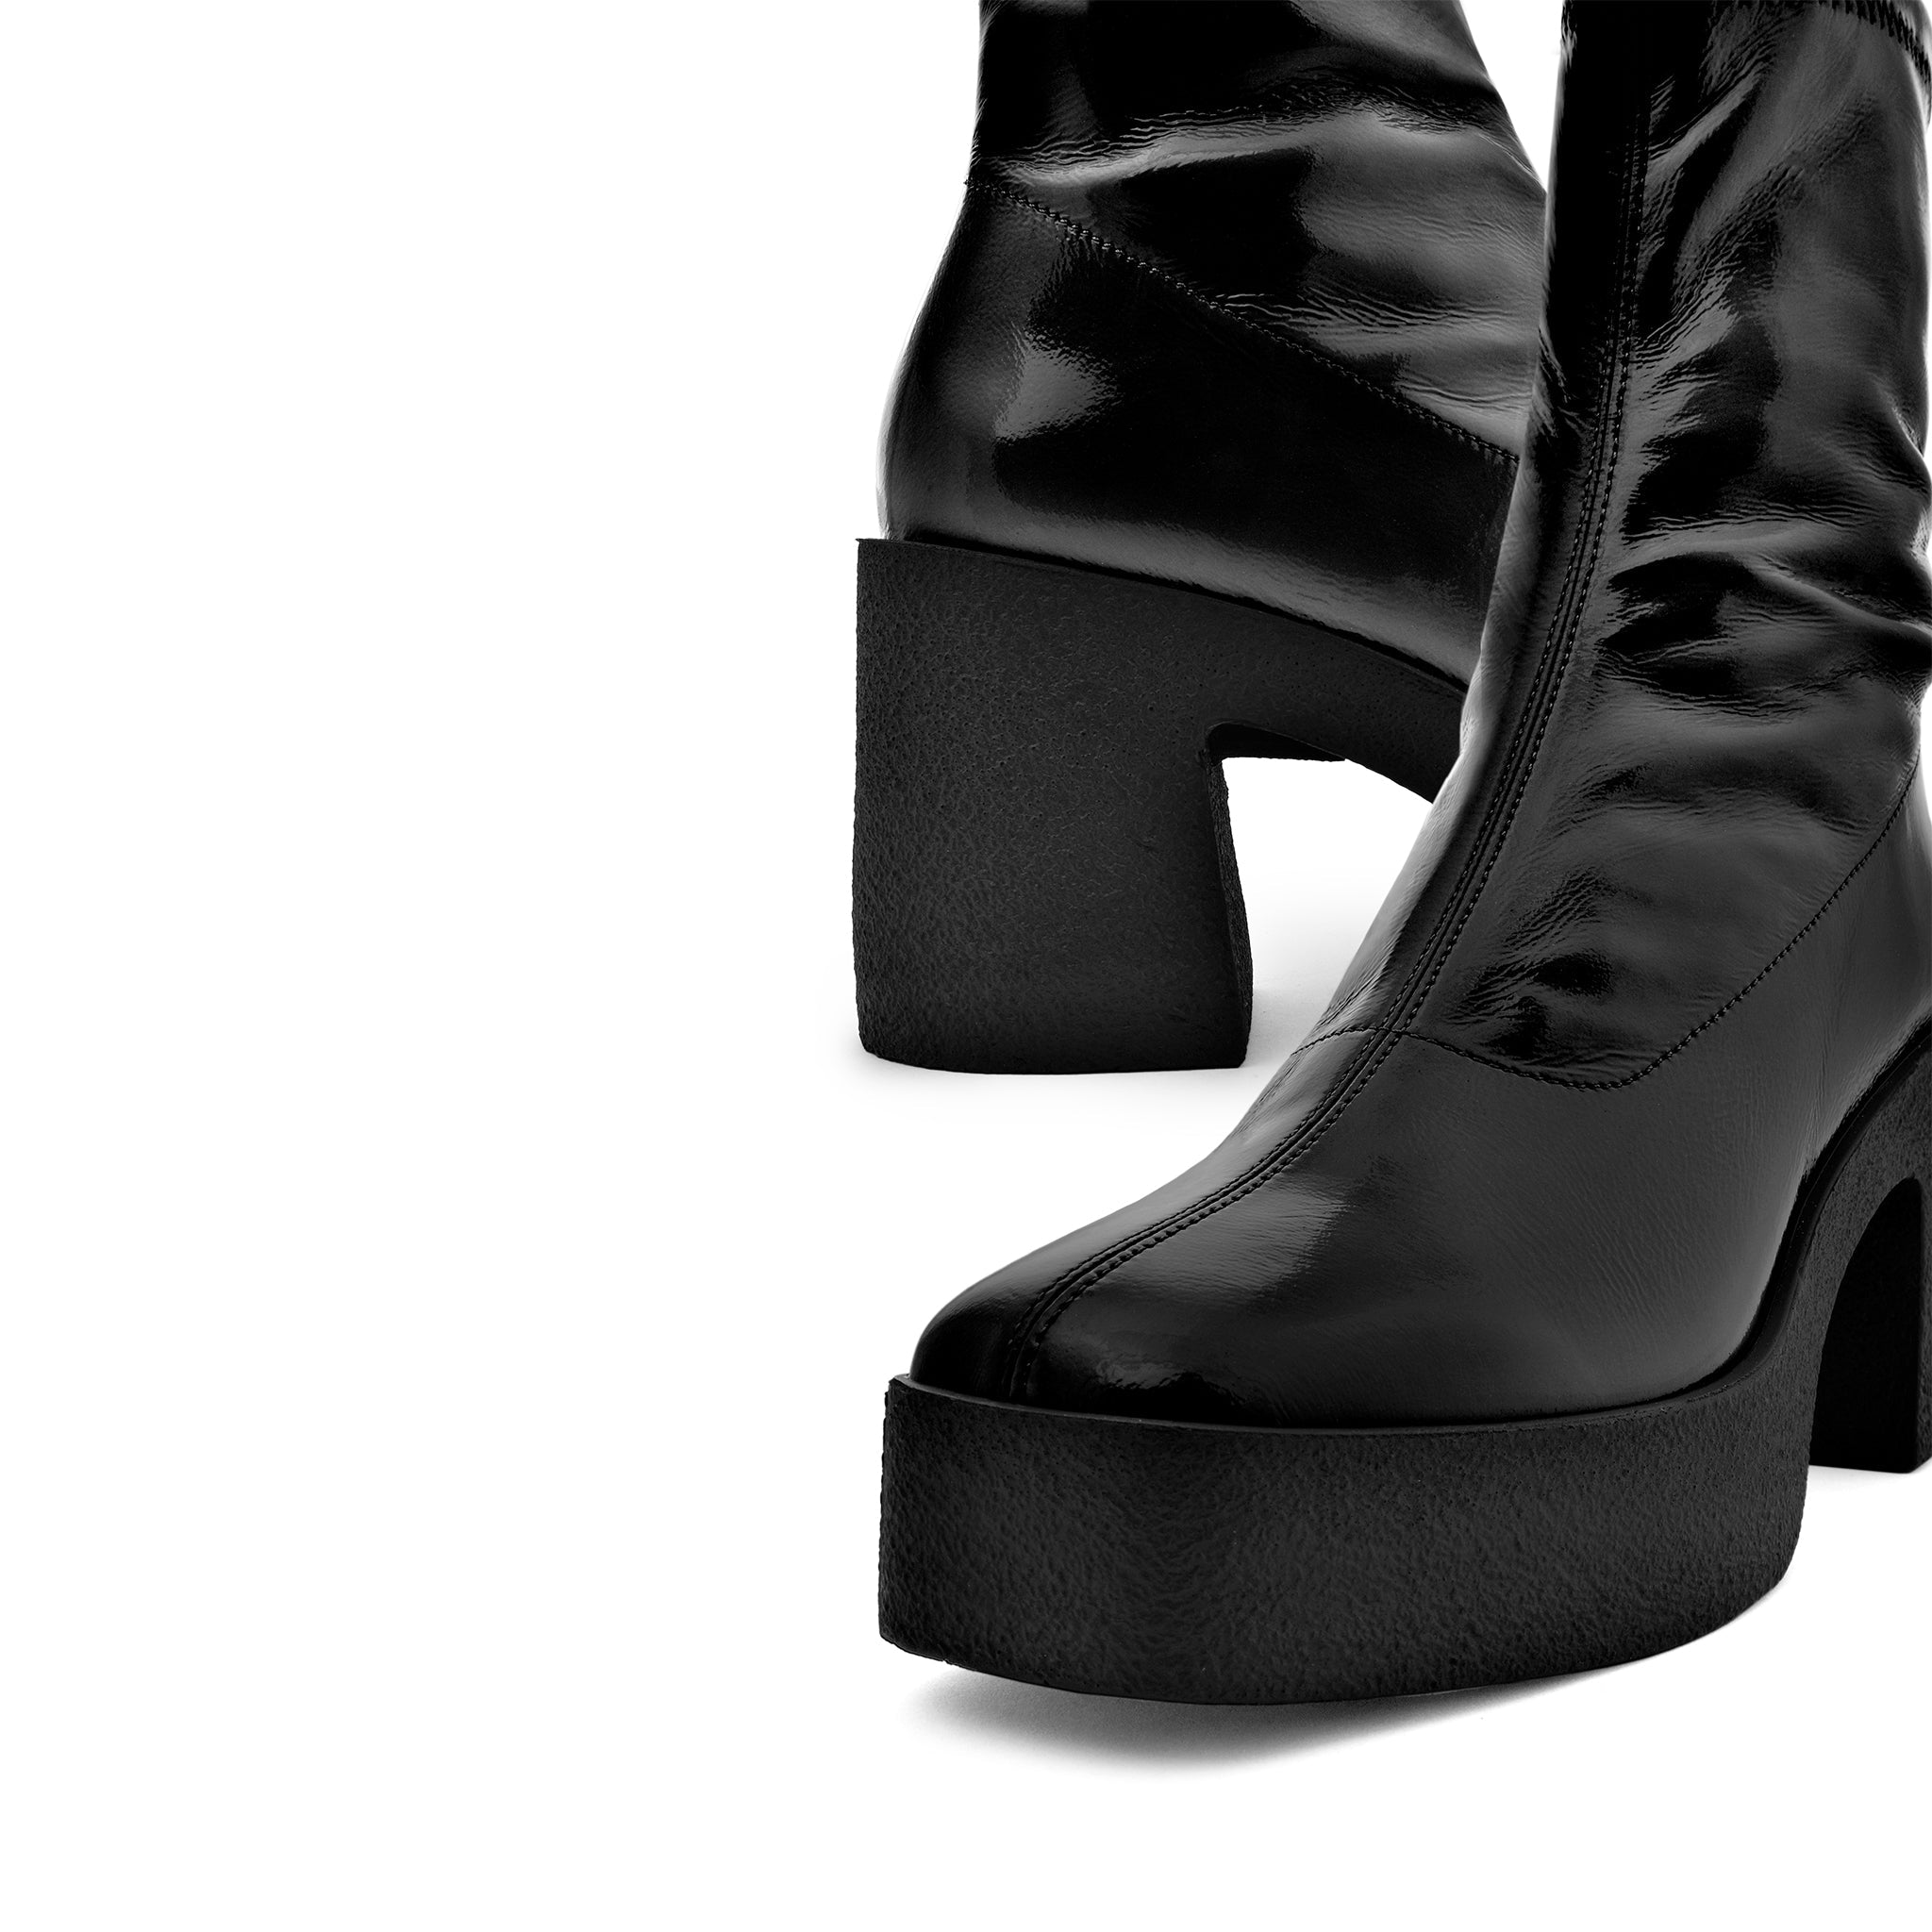 Umi Black Stretch Patent Chunky Ankle Boots 20077-02-12 - 10